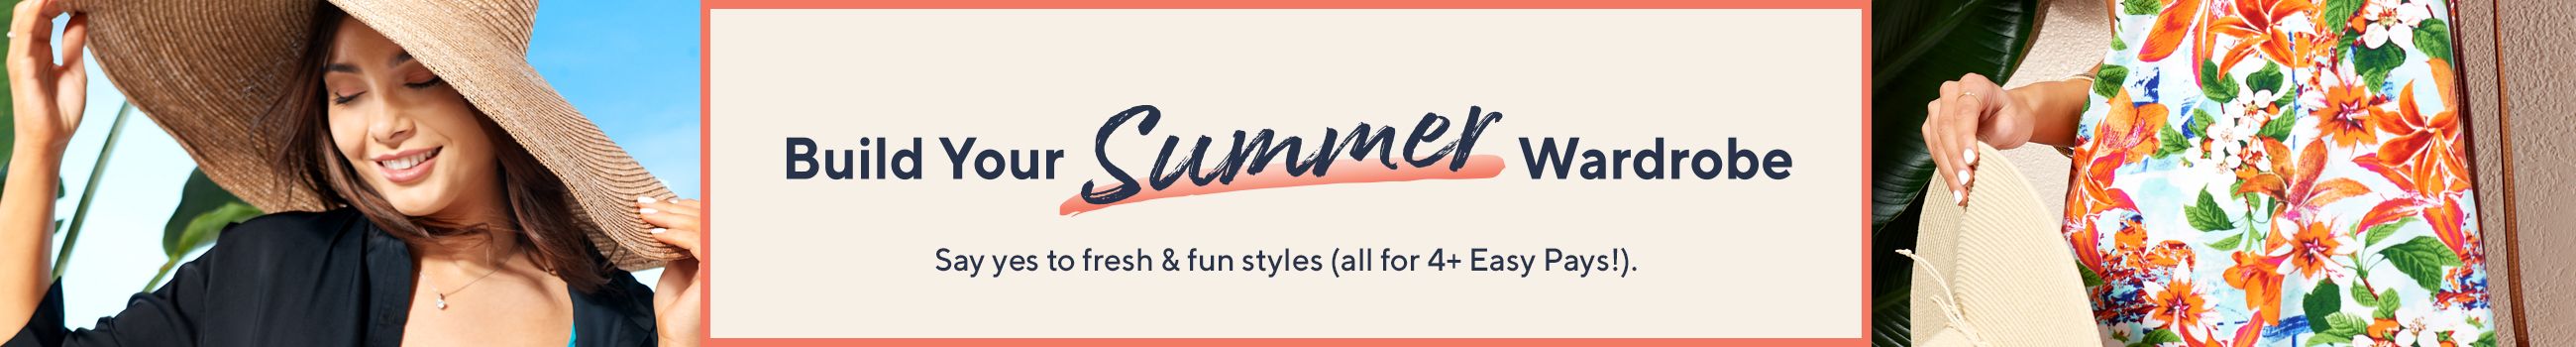 Build Your Summer Wardrobe. Say yes to fresh & fun styles (all for 4+ Easy Pays!). 